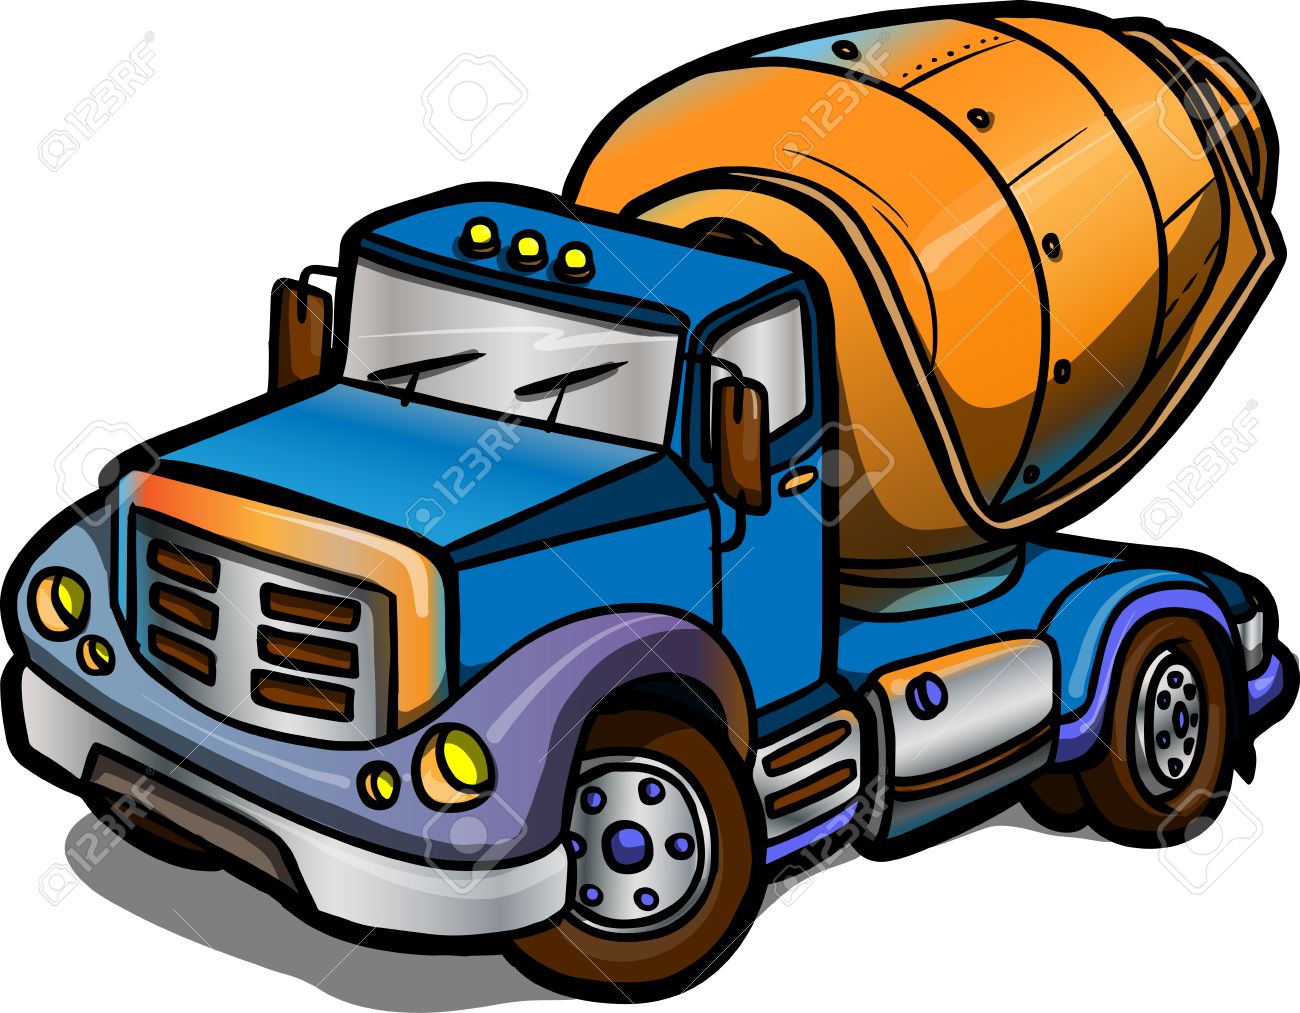 Concrete mixing vehicle clipart 20 free Cliparts | Download images on